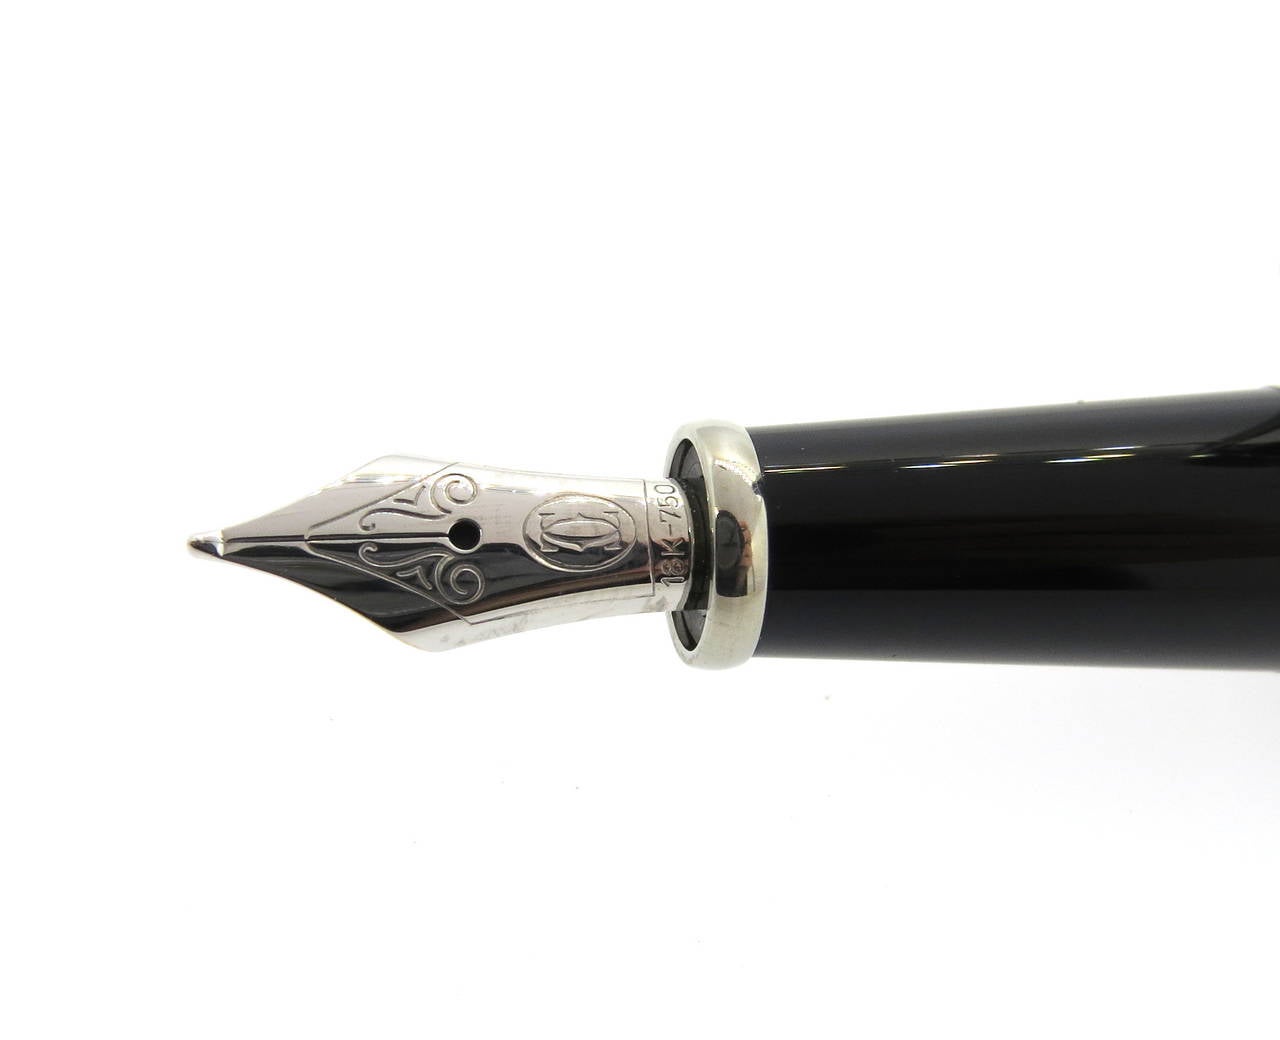 Classic Cartier Diabolo fountain pen with a black composite body and palladium finishes as well as a jeweler's sapphire cabochon on the cap. Pen measures 142mm long and features an 18K gold nib. Pen is a brand new in store sample, comes with